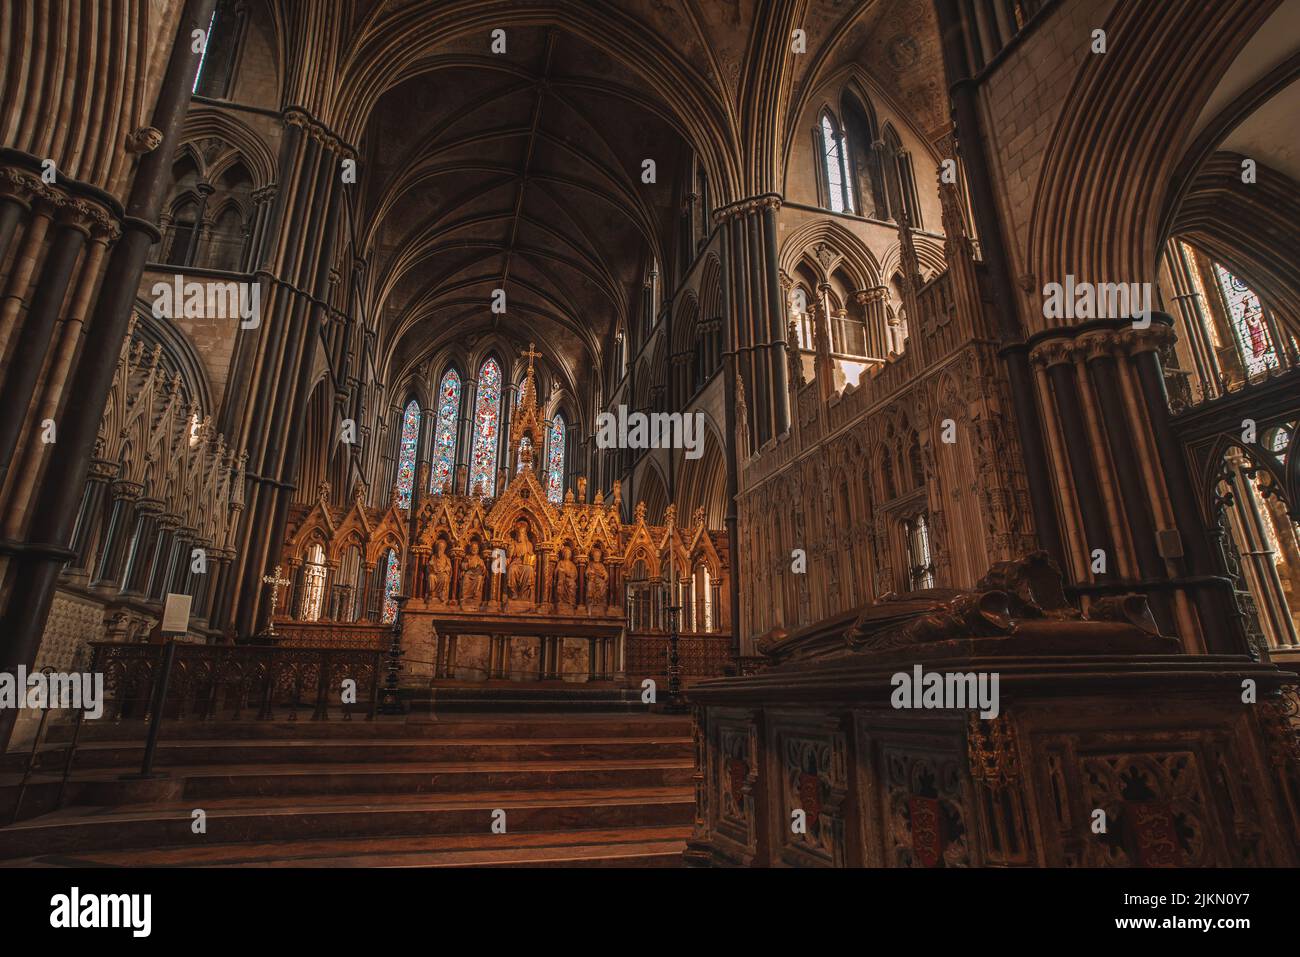 A Worcester Cathedral, United Kingdom The beauty and history of Worcester cathedral. Stock Photo